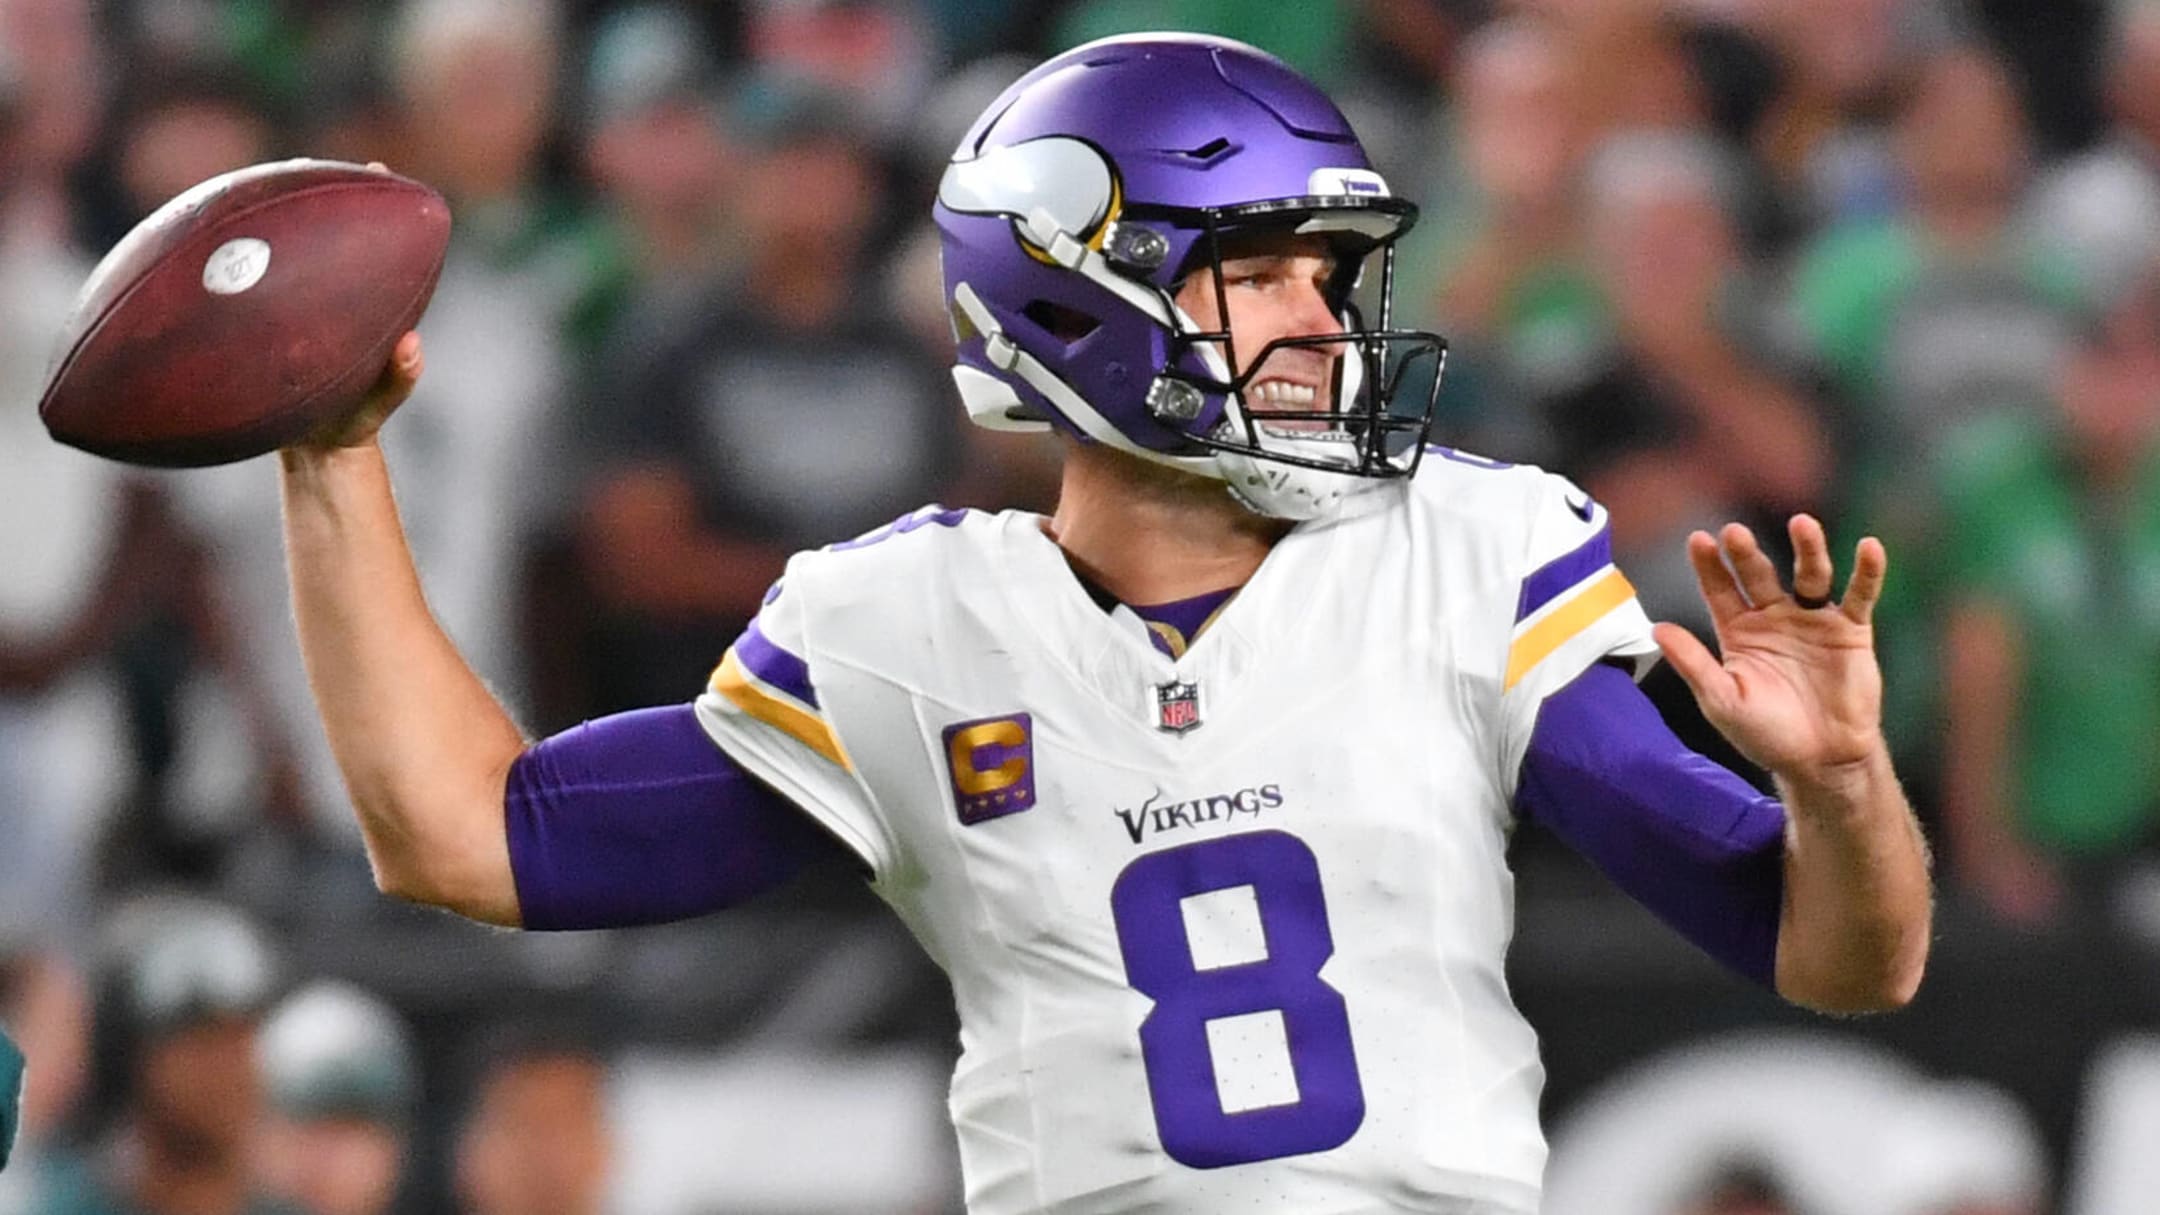 Week 3 NFC North predictions: Vikings earn first win, Bears' woes continue